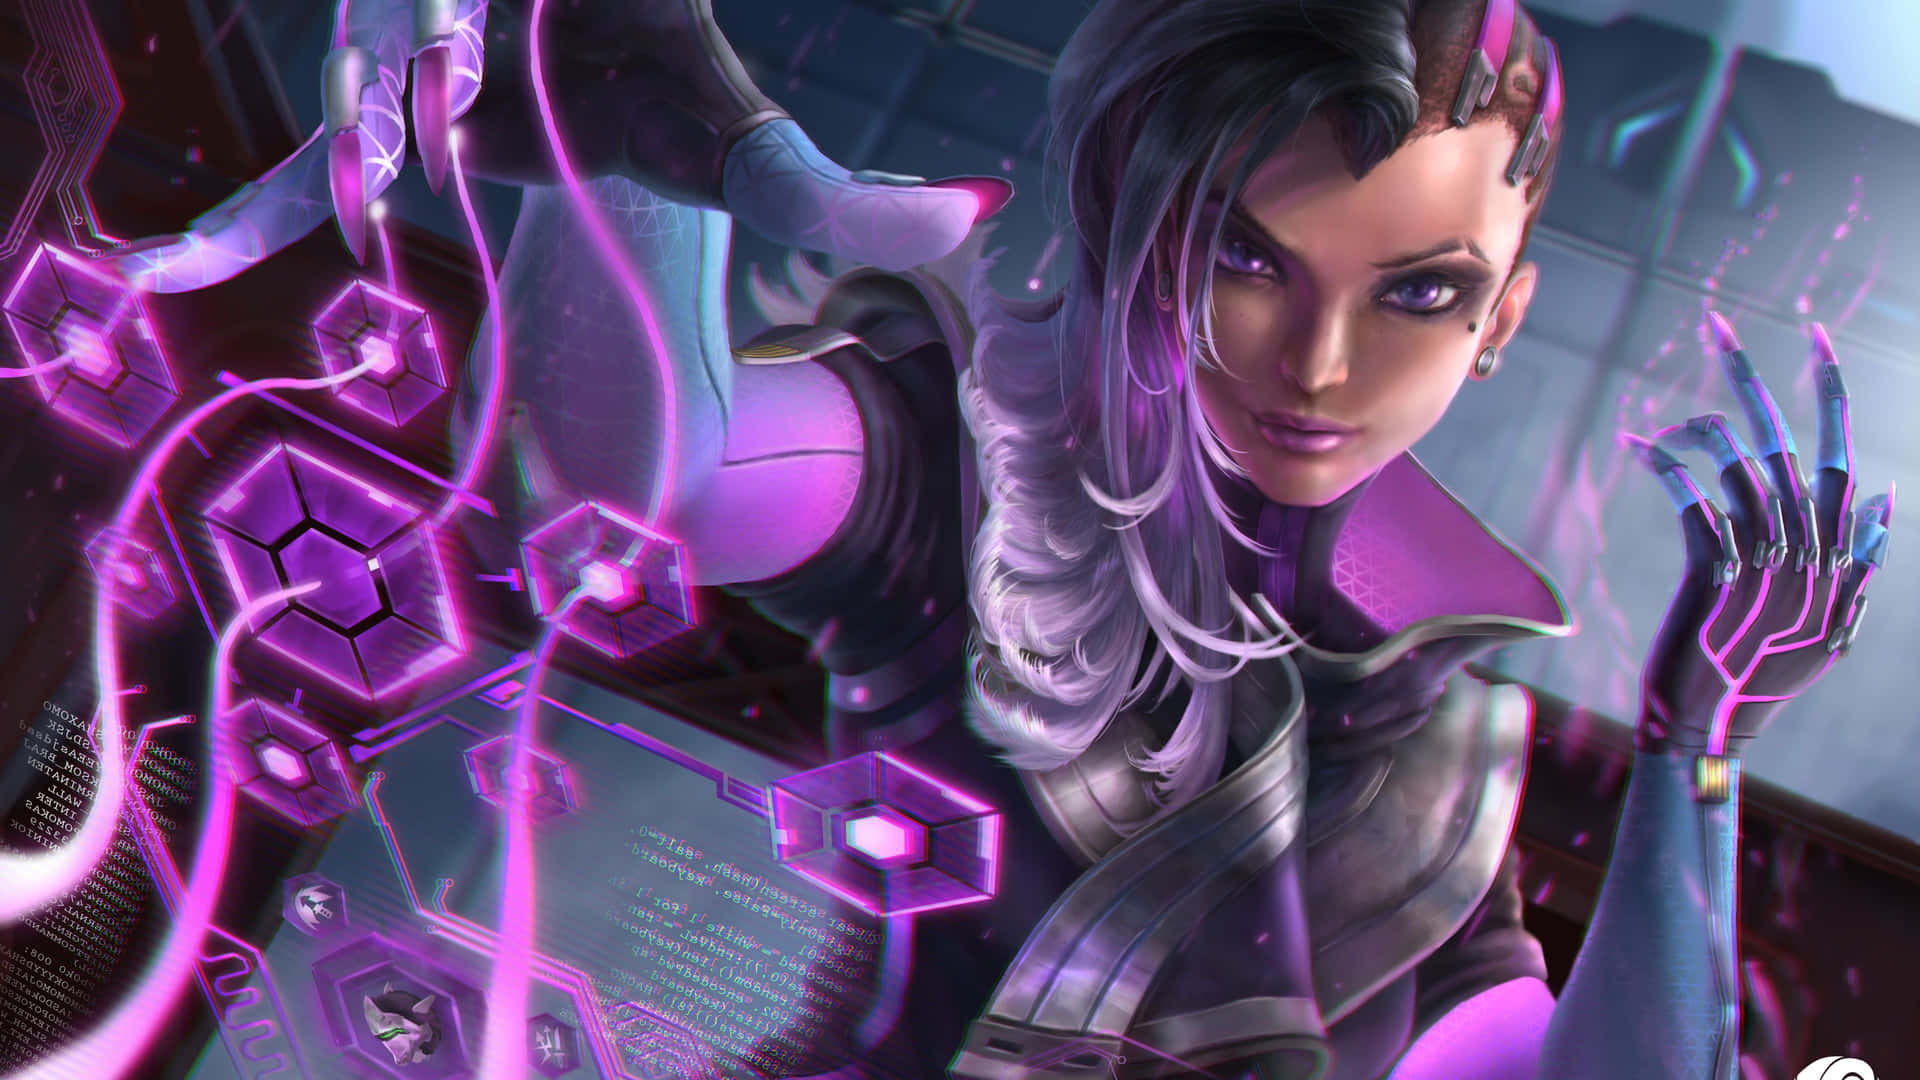 Sombra hacking into the system in Overwatch Wallpaper